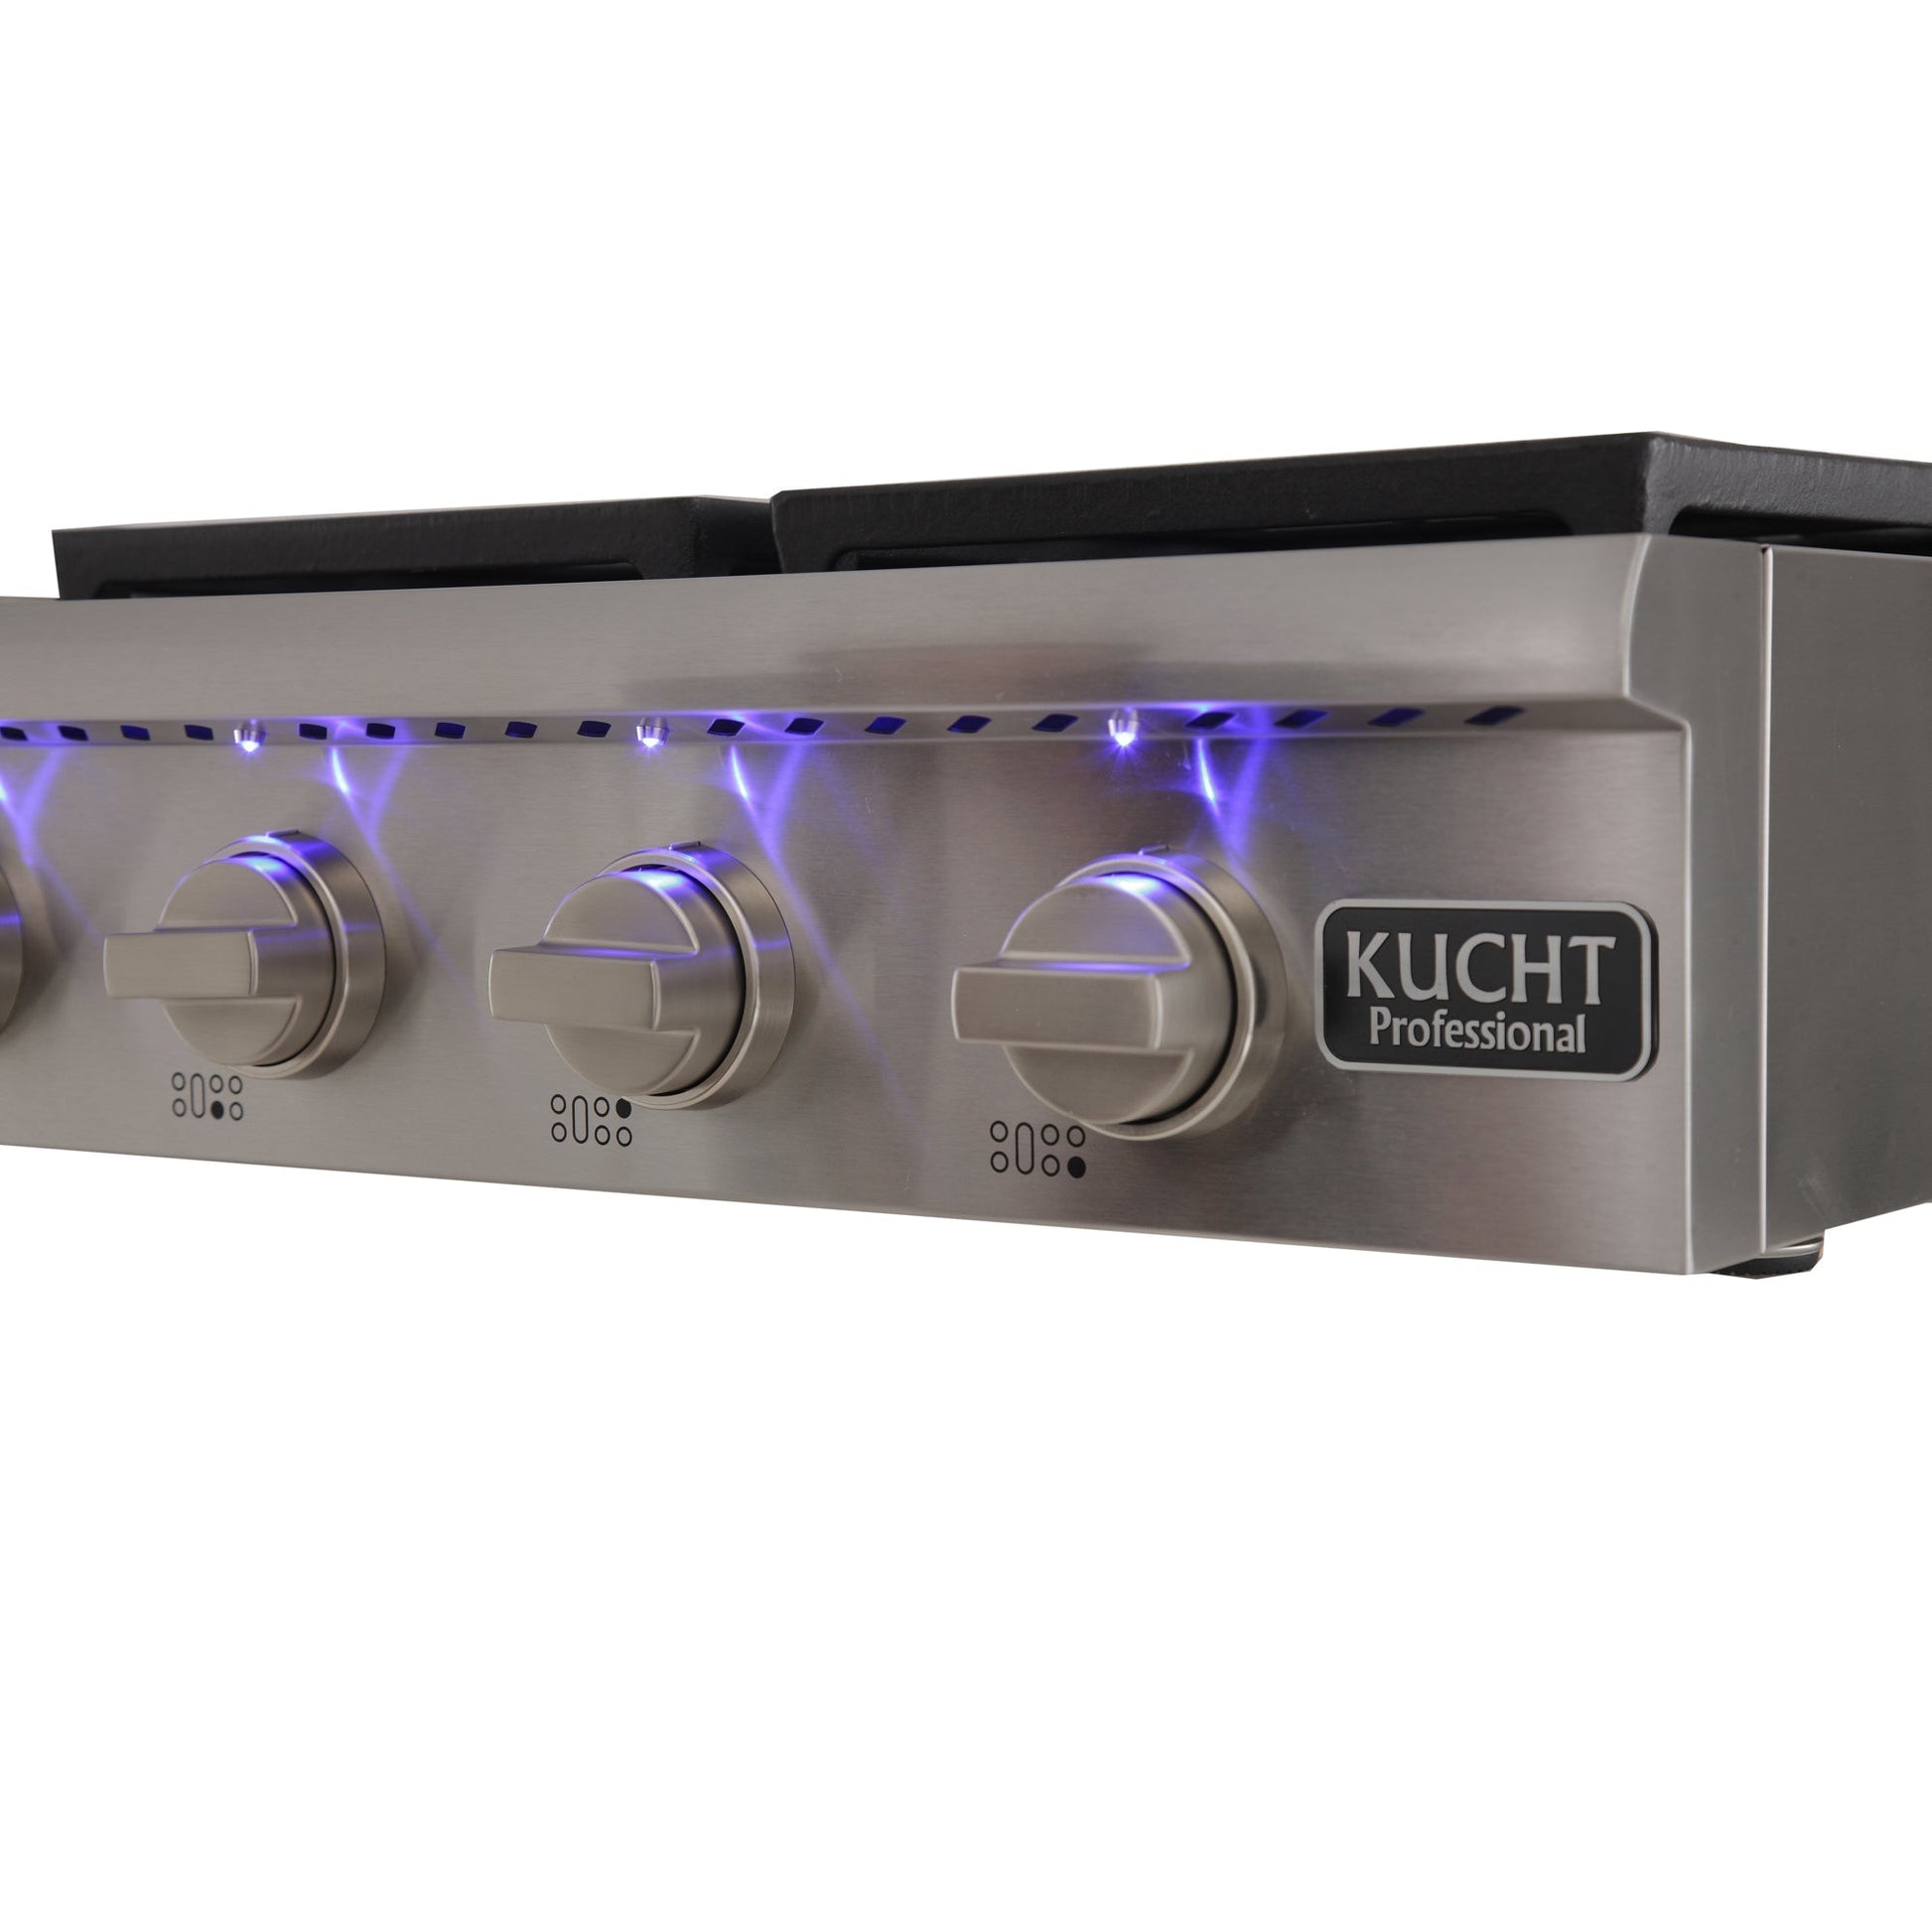 Kucht KRT Series 48" Natural Gas Range-Top With 6 Burners, Griddle and Royal Blue Knobs